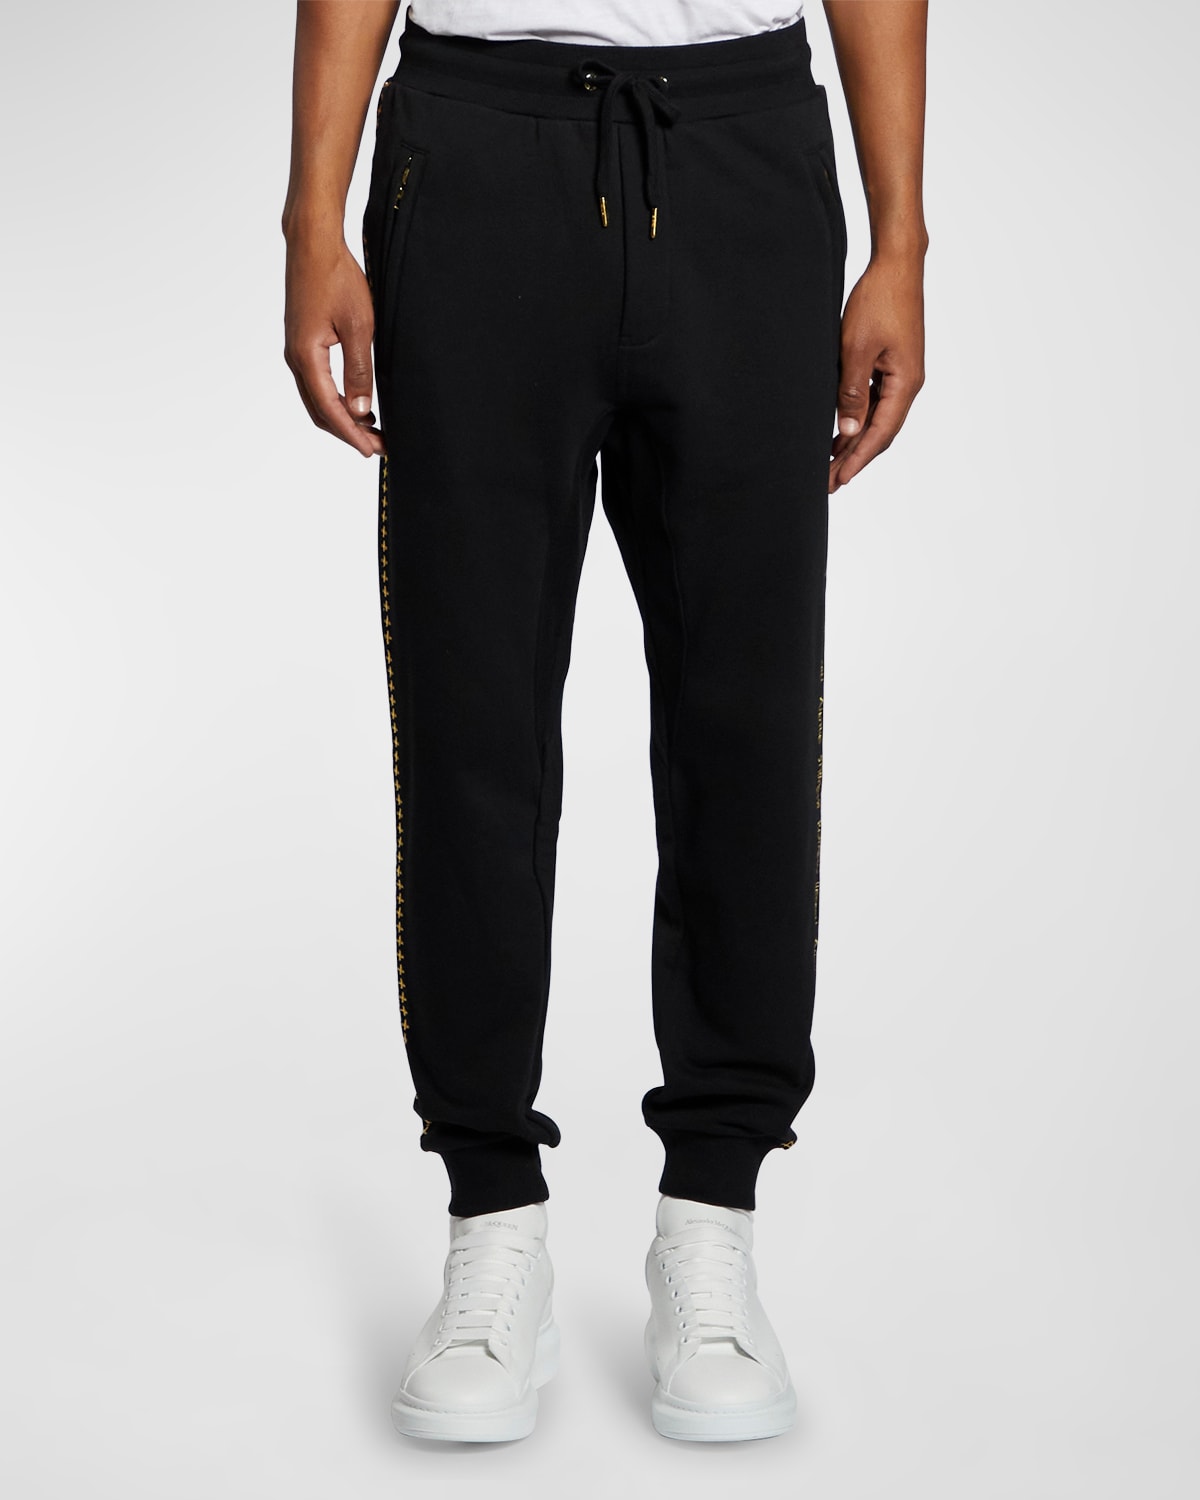 Men's 23 Restore Embroidered Track Pants